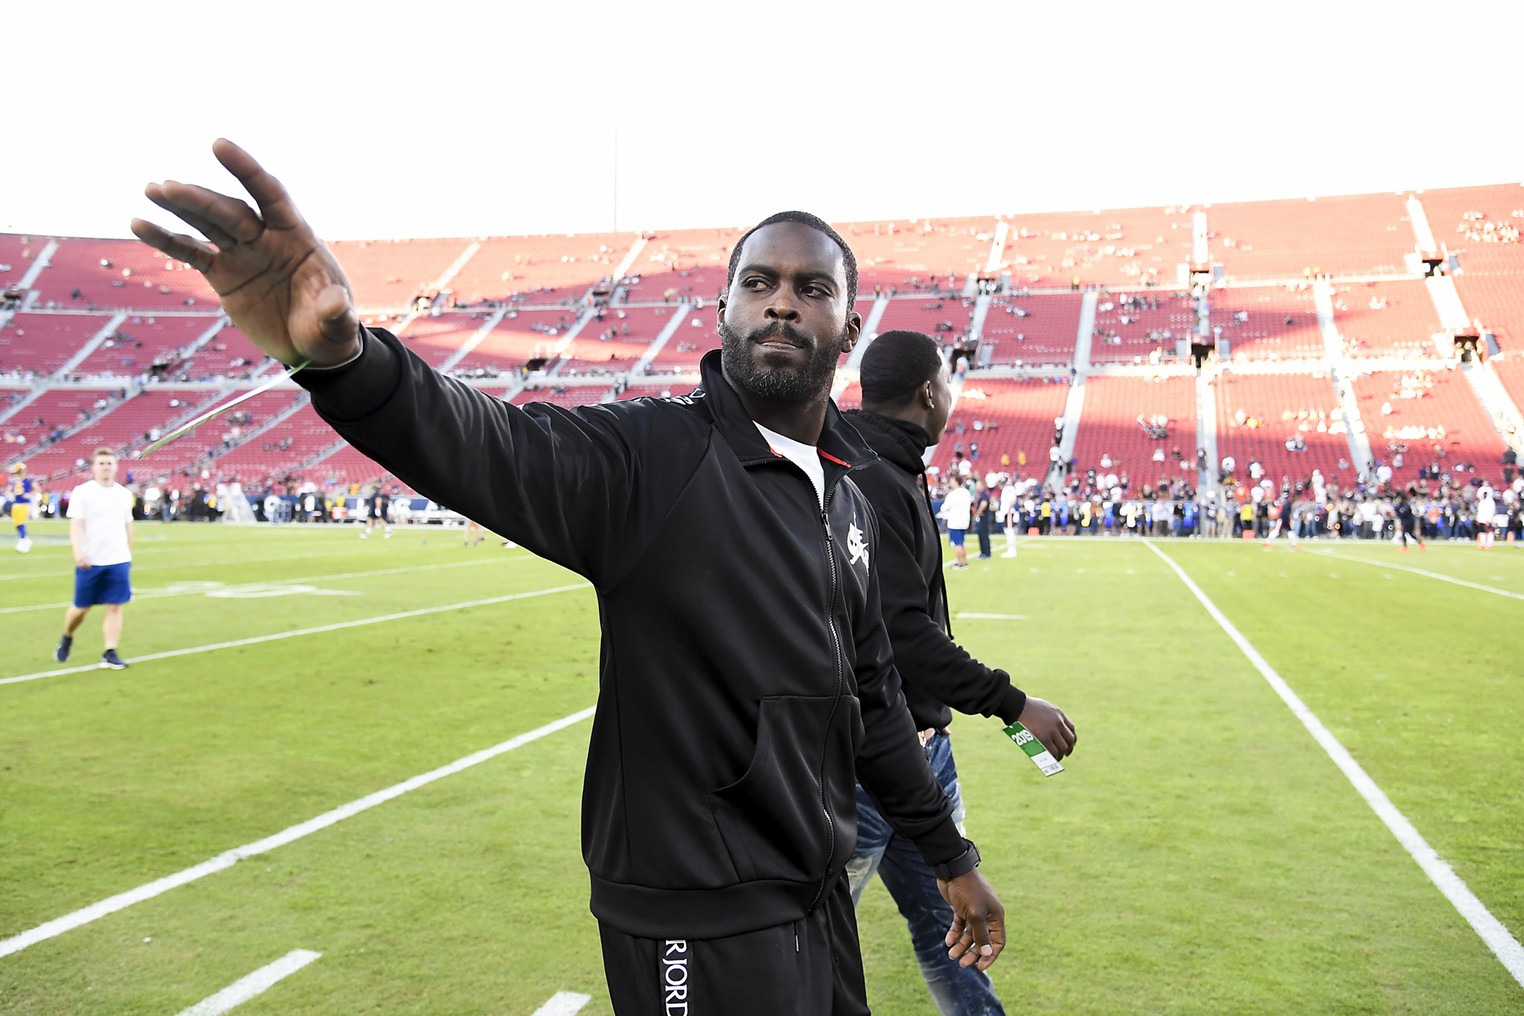 Michael Vick ends NFL career after failing to find employment, NFL News